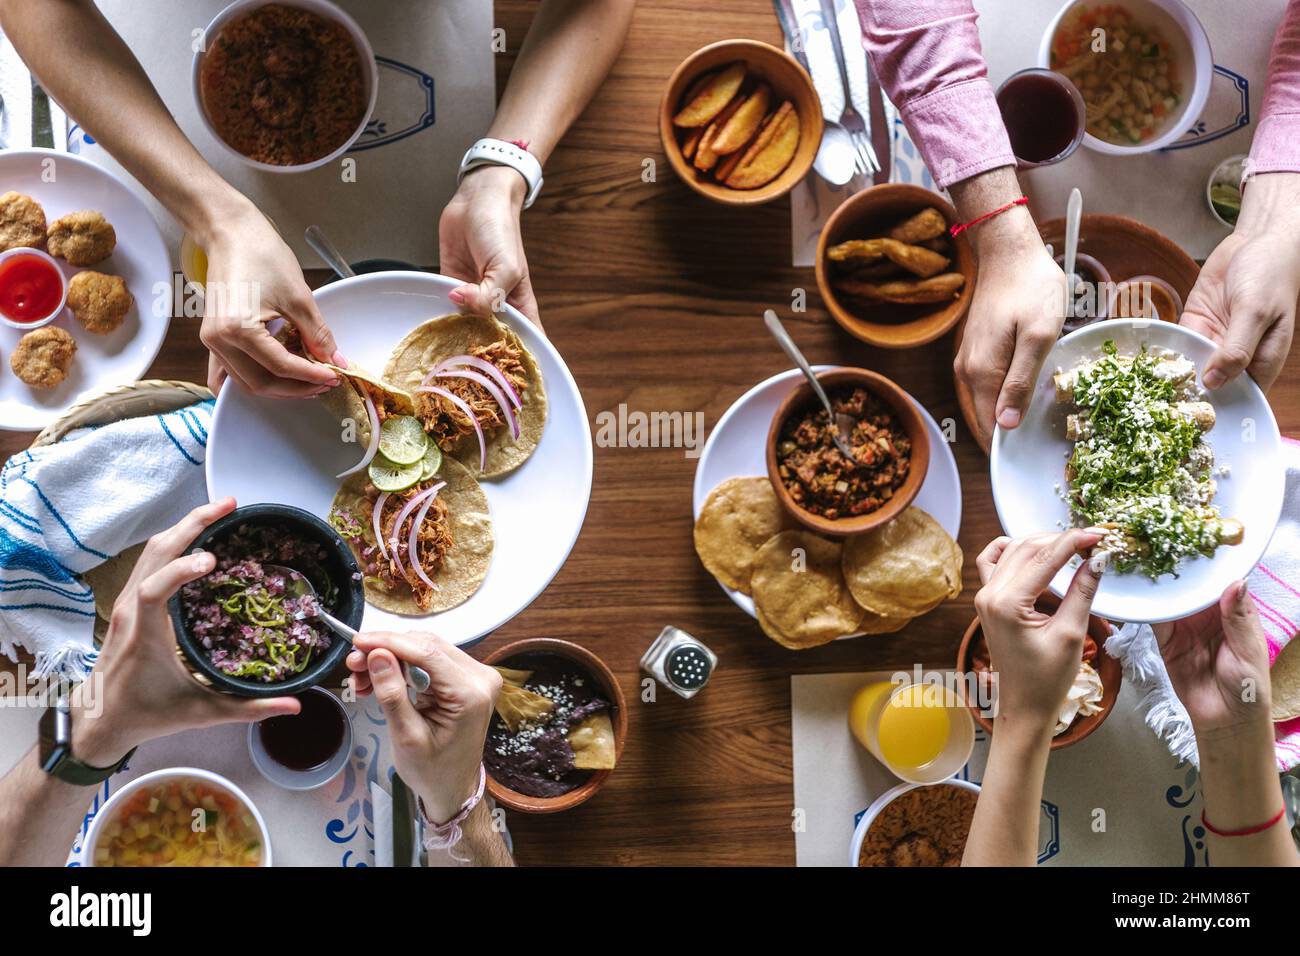 group of latin Friends eating Mexican Tacos and traditional food, snacks and peoples hands over table, top view. Mexican cuisine Latin America Stock Photo